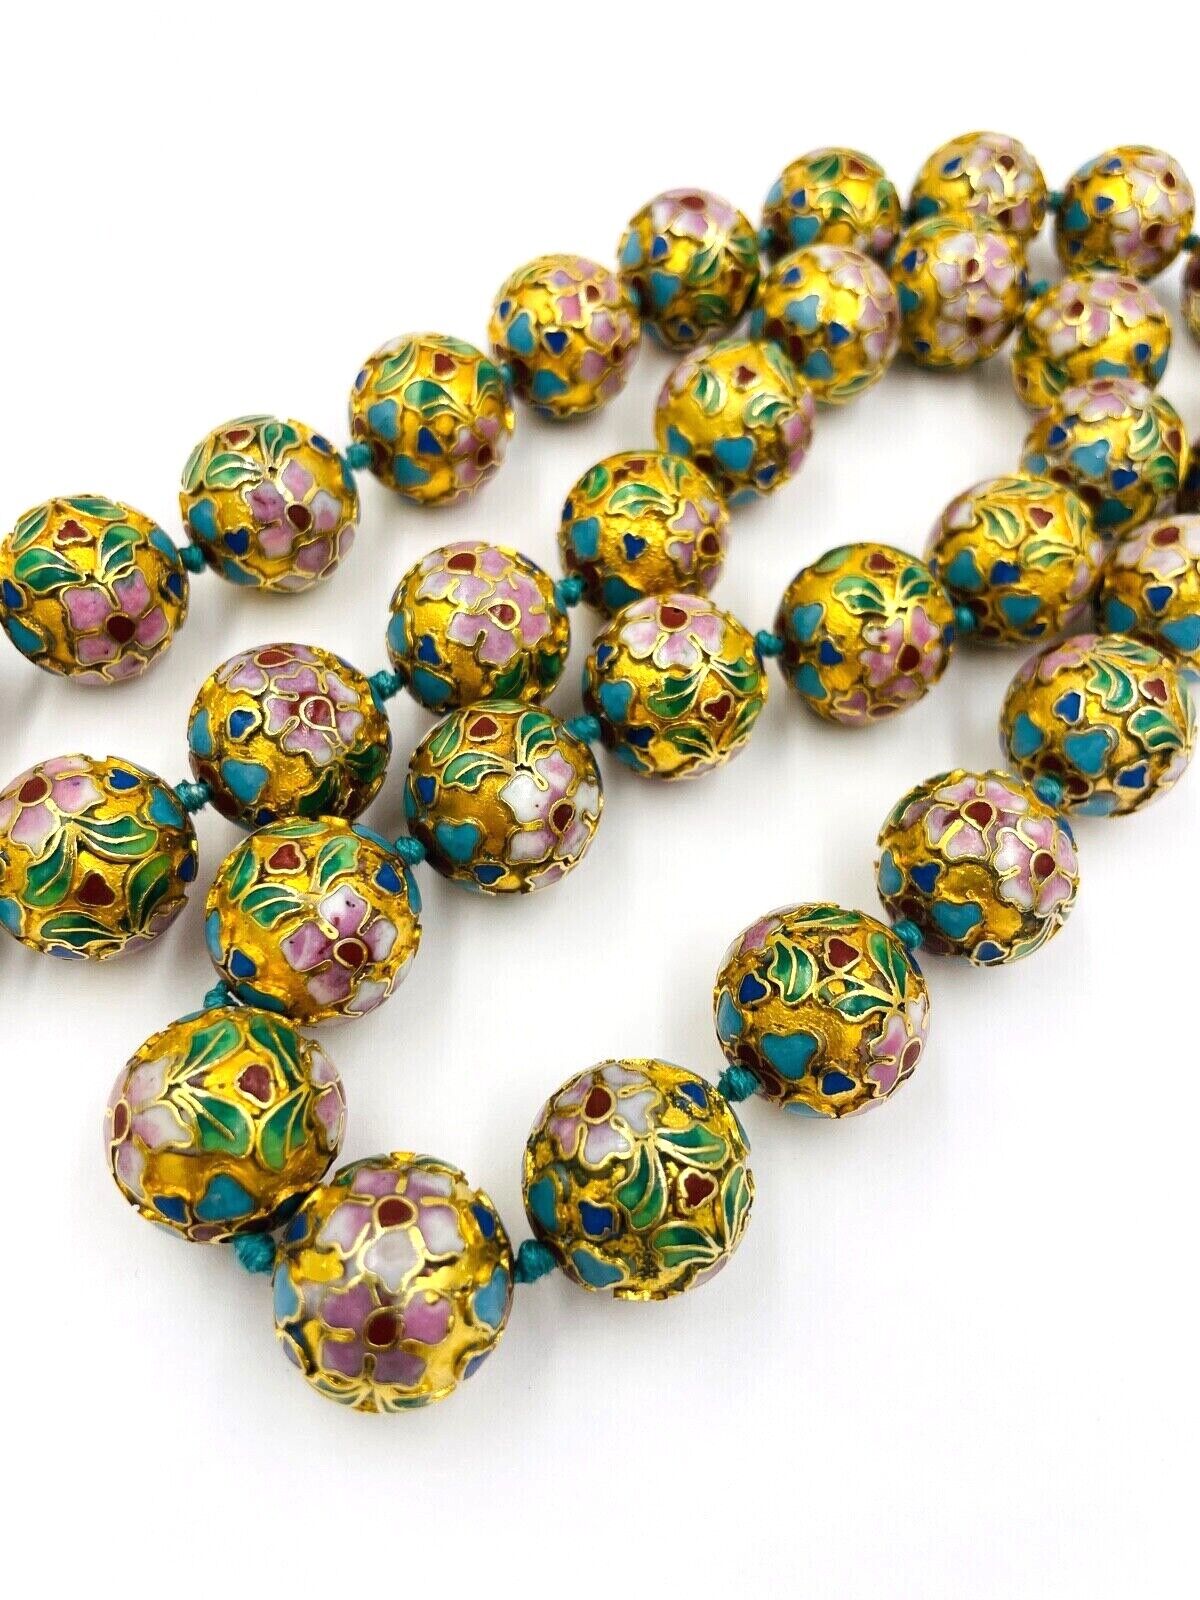 Antique Chinese Necklace - Cloisonne Enamel Gold beads - Lotus Flowers